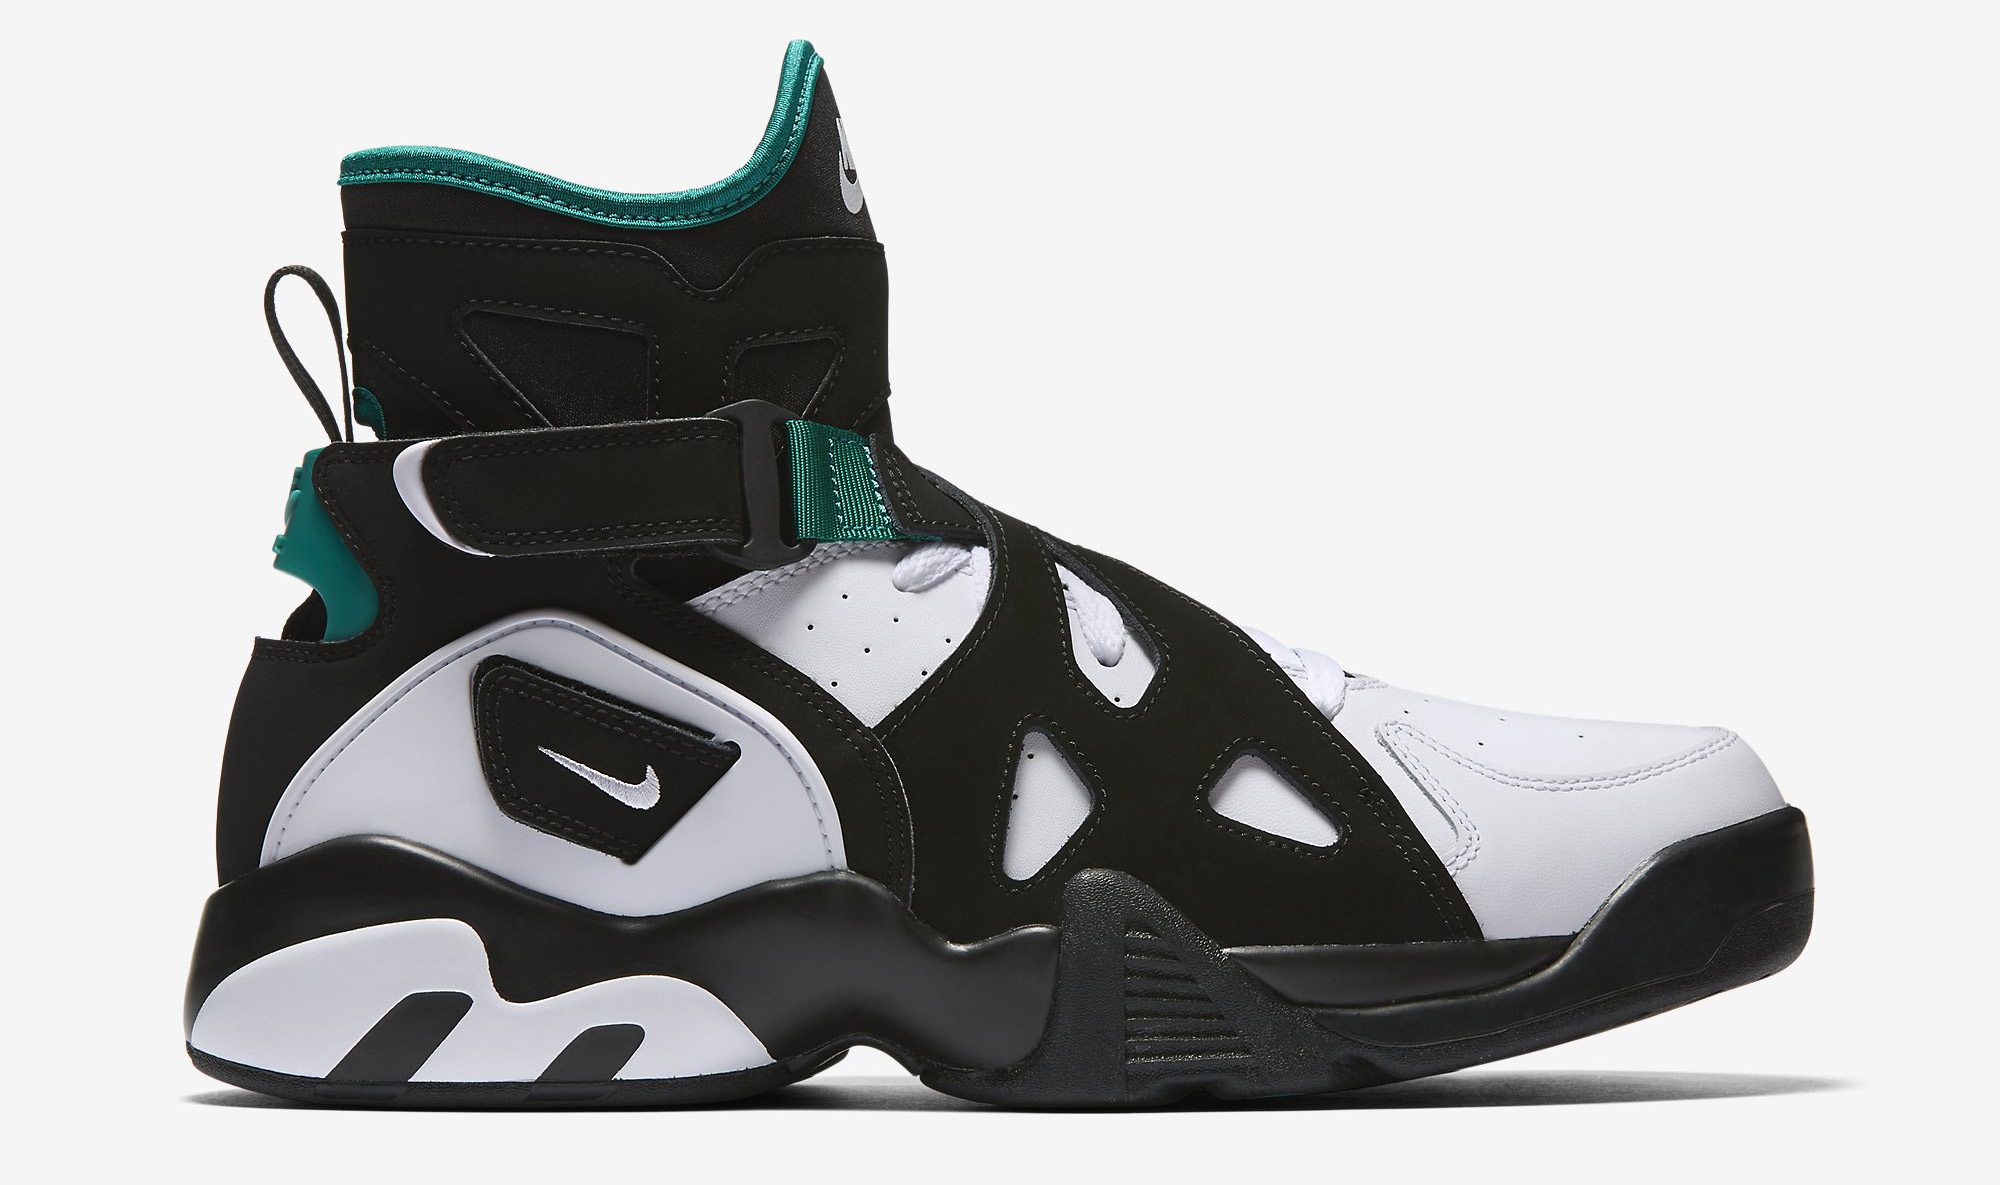 Nike Air Unlimited David Robinson 889013001 Sole Collector